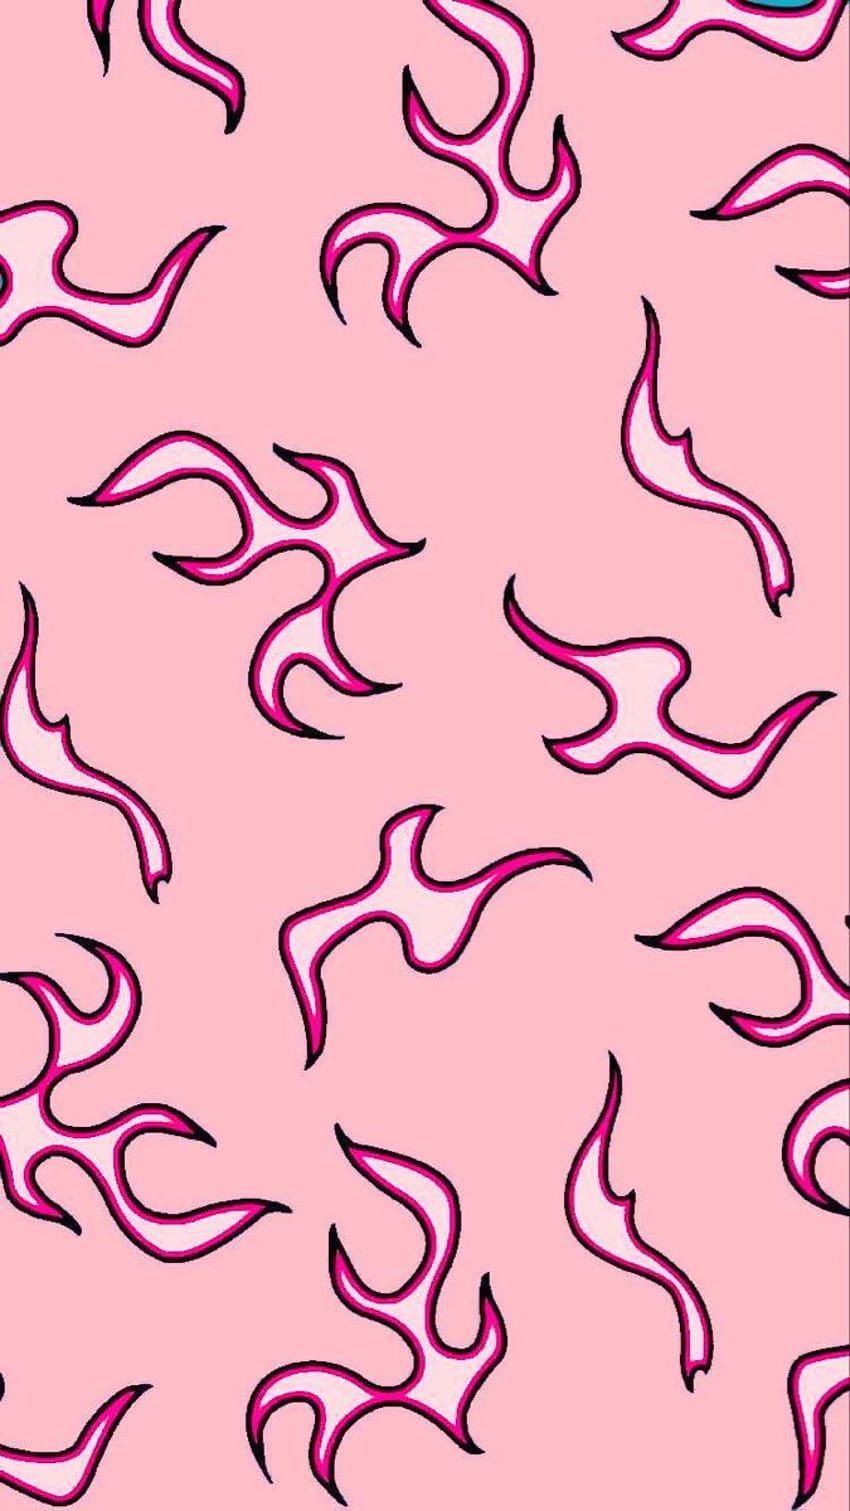 A pink background with black and white designs - Flames